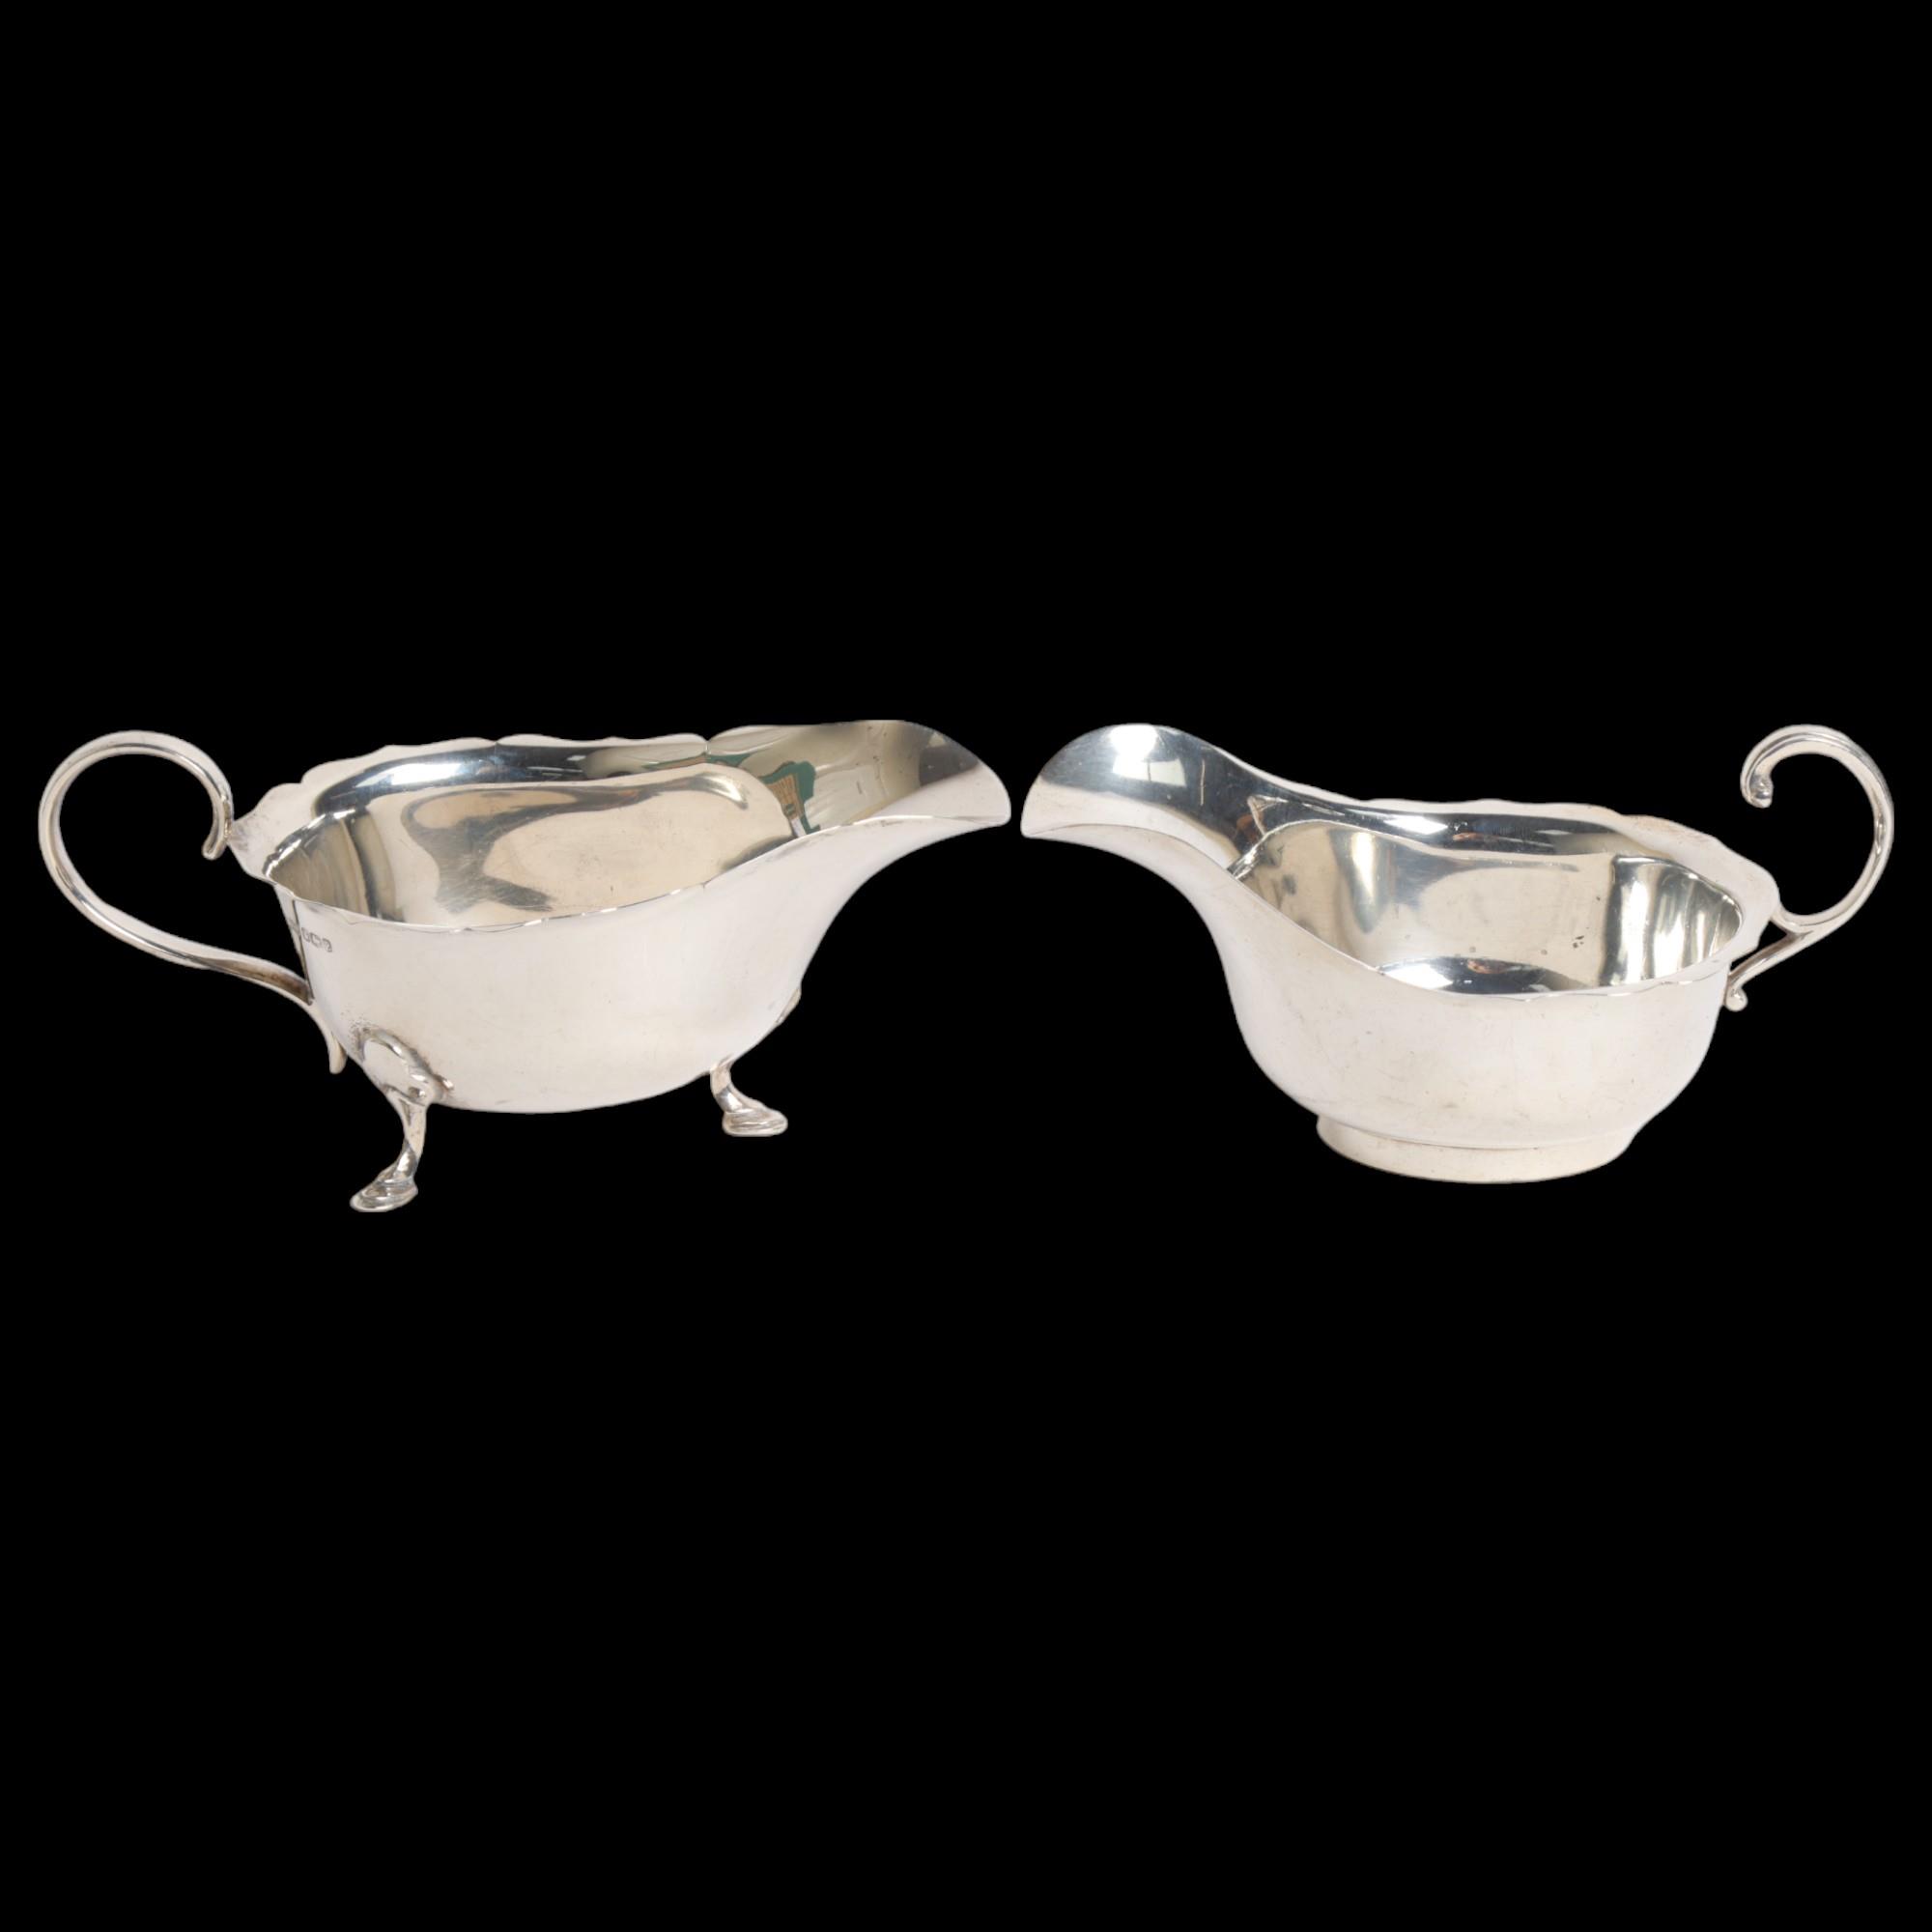 2 silver sauce boats, 7.6oz, 1 by Mappin & Webb for hallmarks for Sheffield 1957, the other